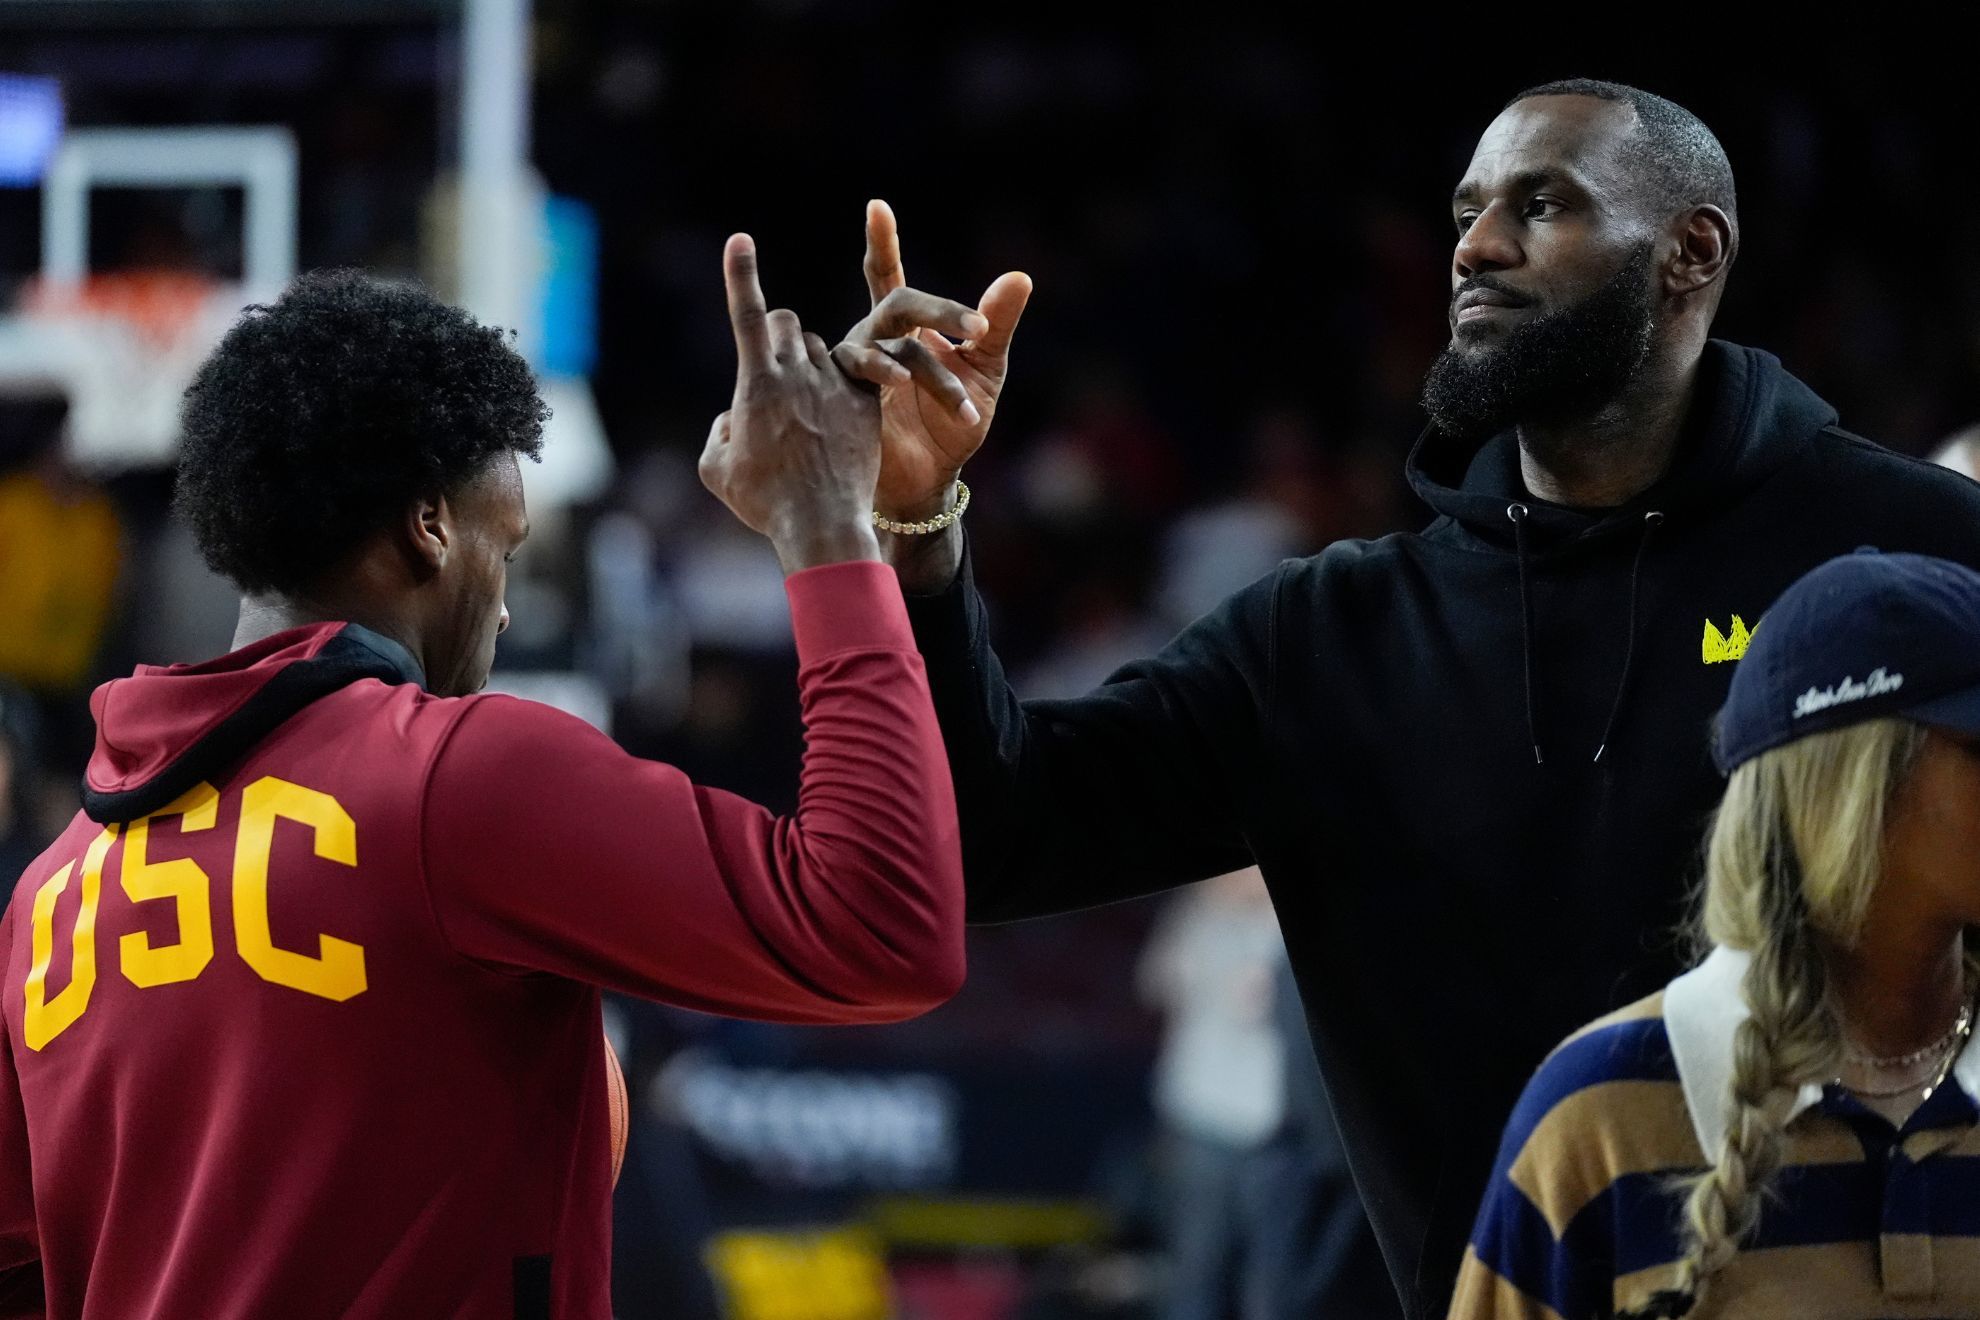 LeBron James shouldnt force Bronny to play with him, says Doc Rivers son Austin